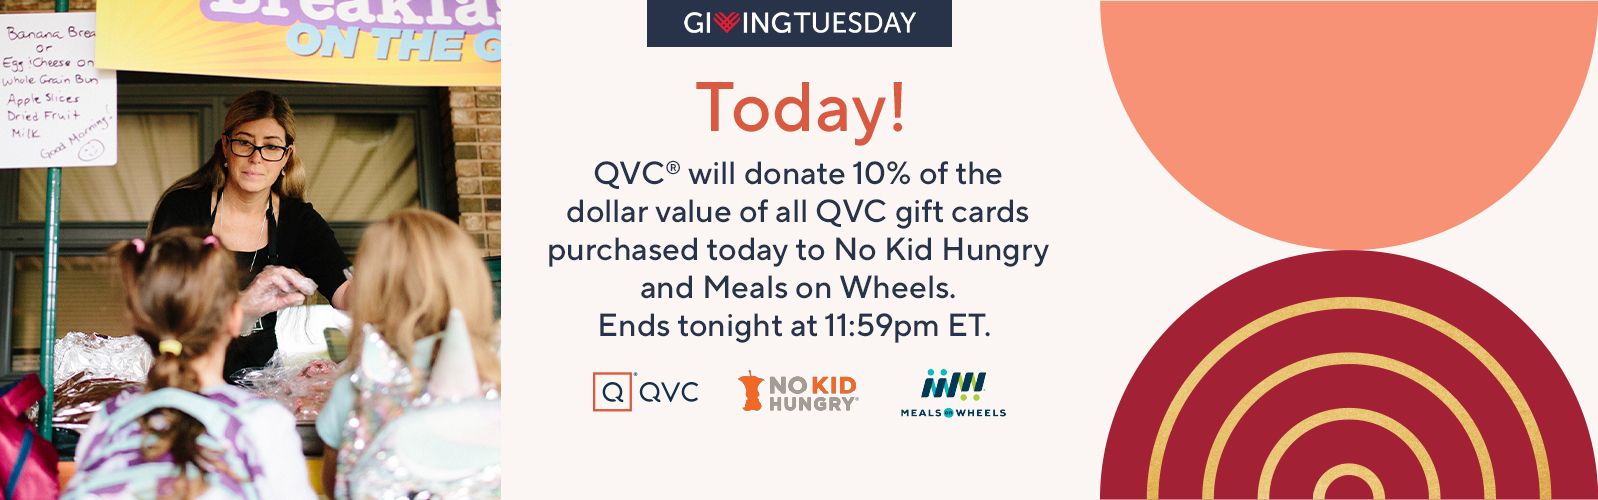 Giving Tuesday Today! QVC® will donate 10% of the dollar value of all QVC gift cards purchased today to No Kid Hungry and Meals on Wheels. Ends tonight at 11:59pm ET.